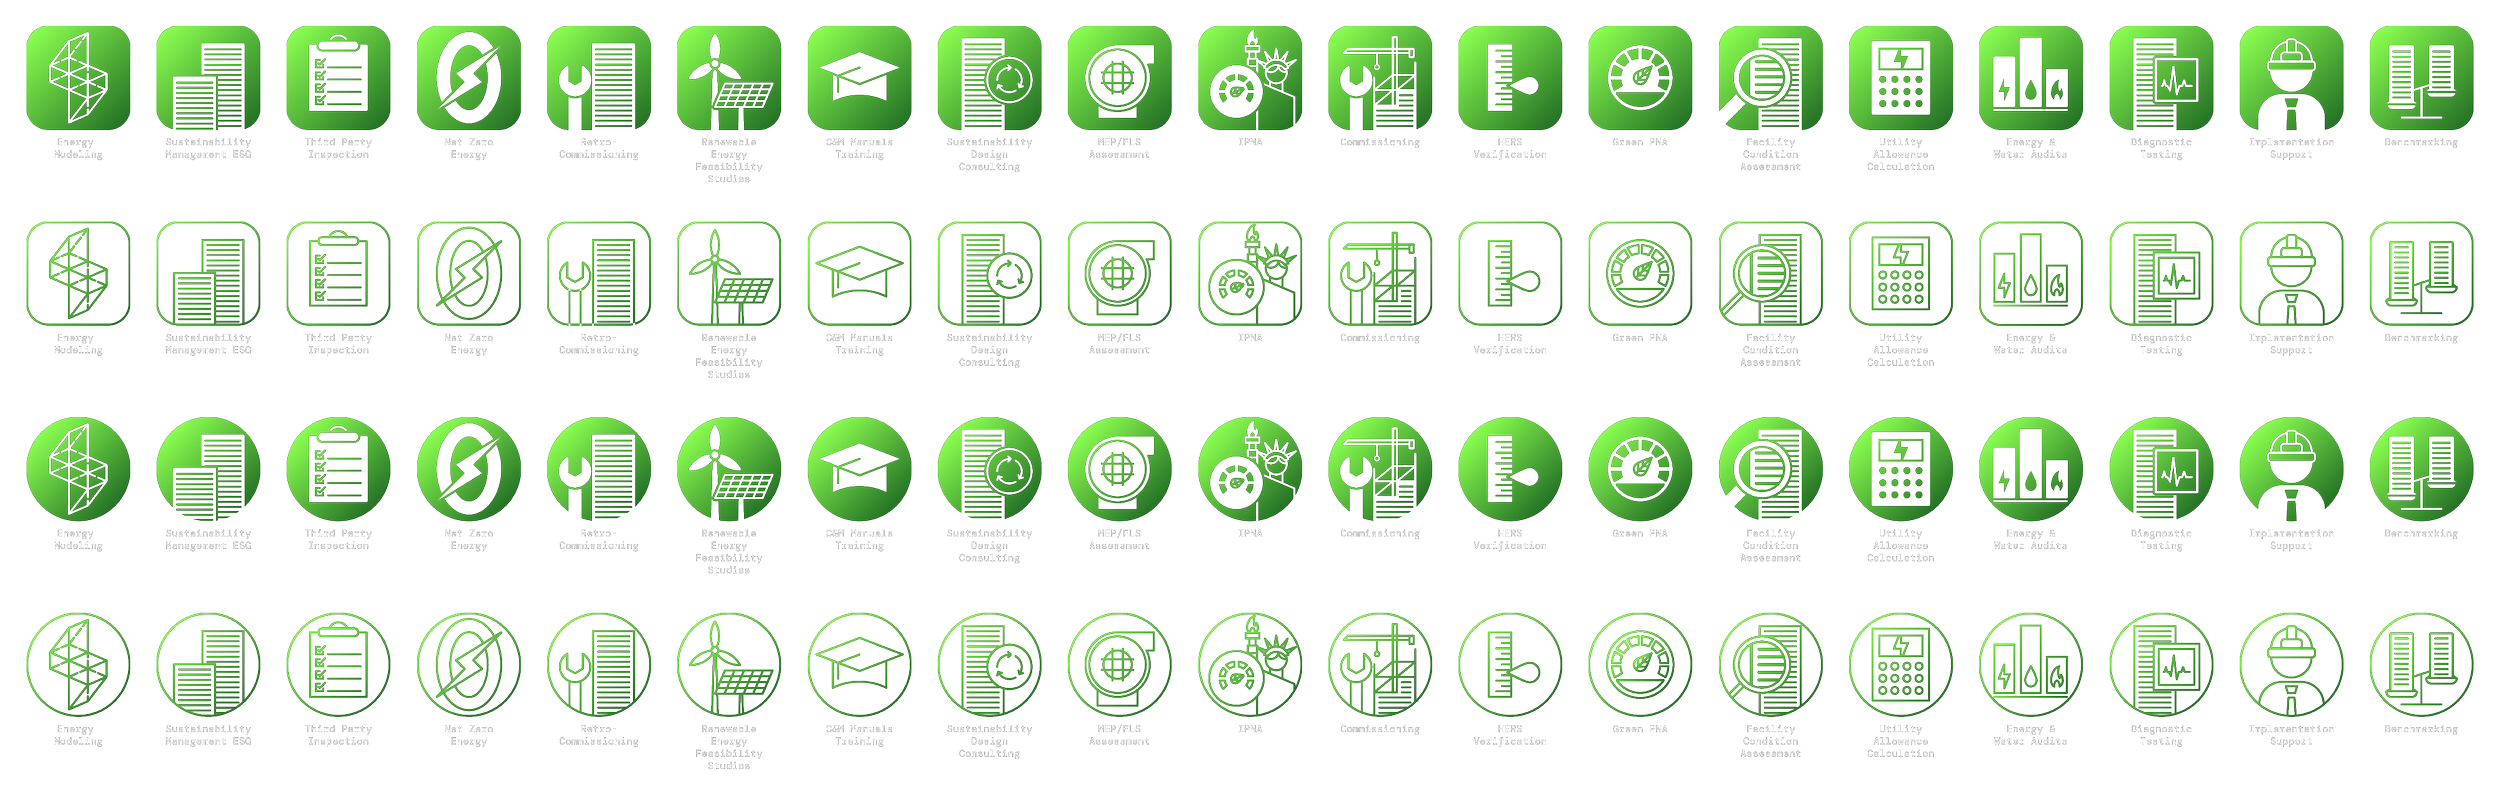 PTE Icons - Arranged-09.png